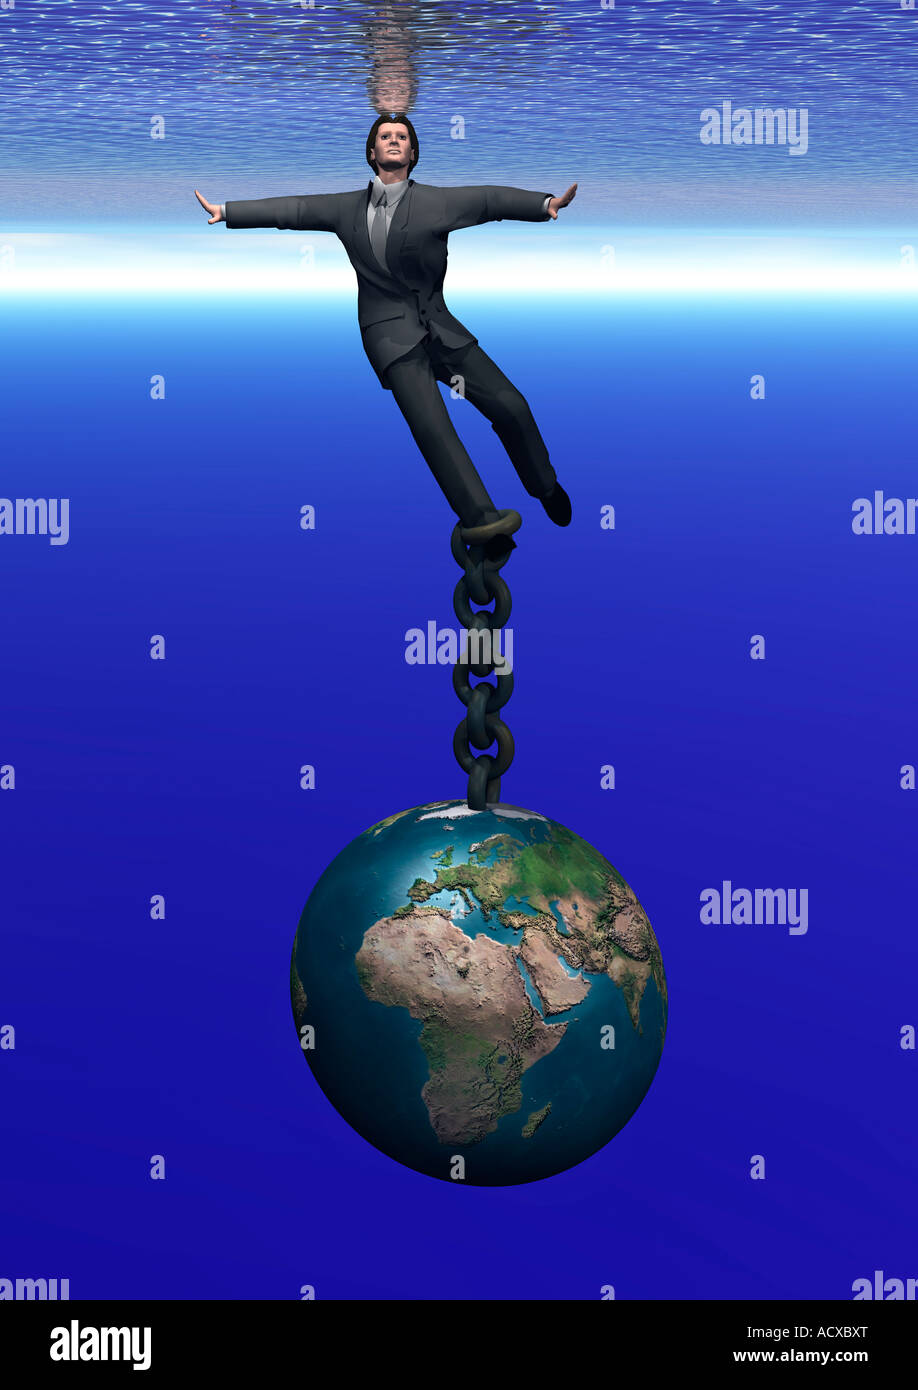 The Weight Of The World.A 3D Conceptual Image Stock Photo